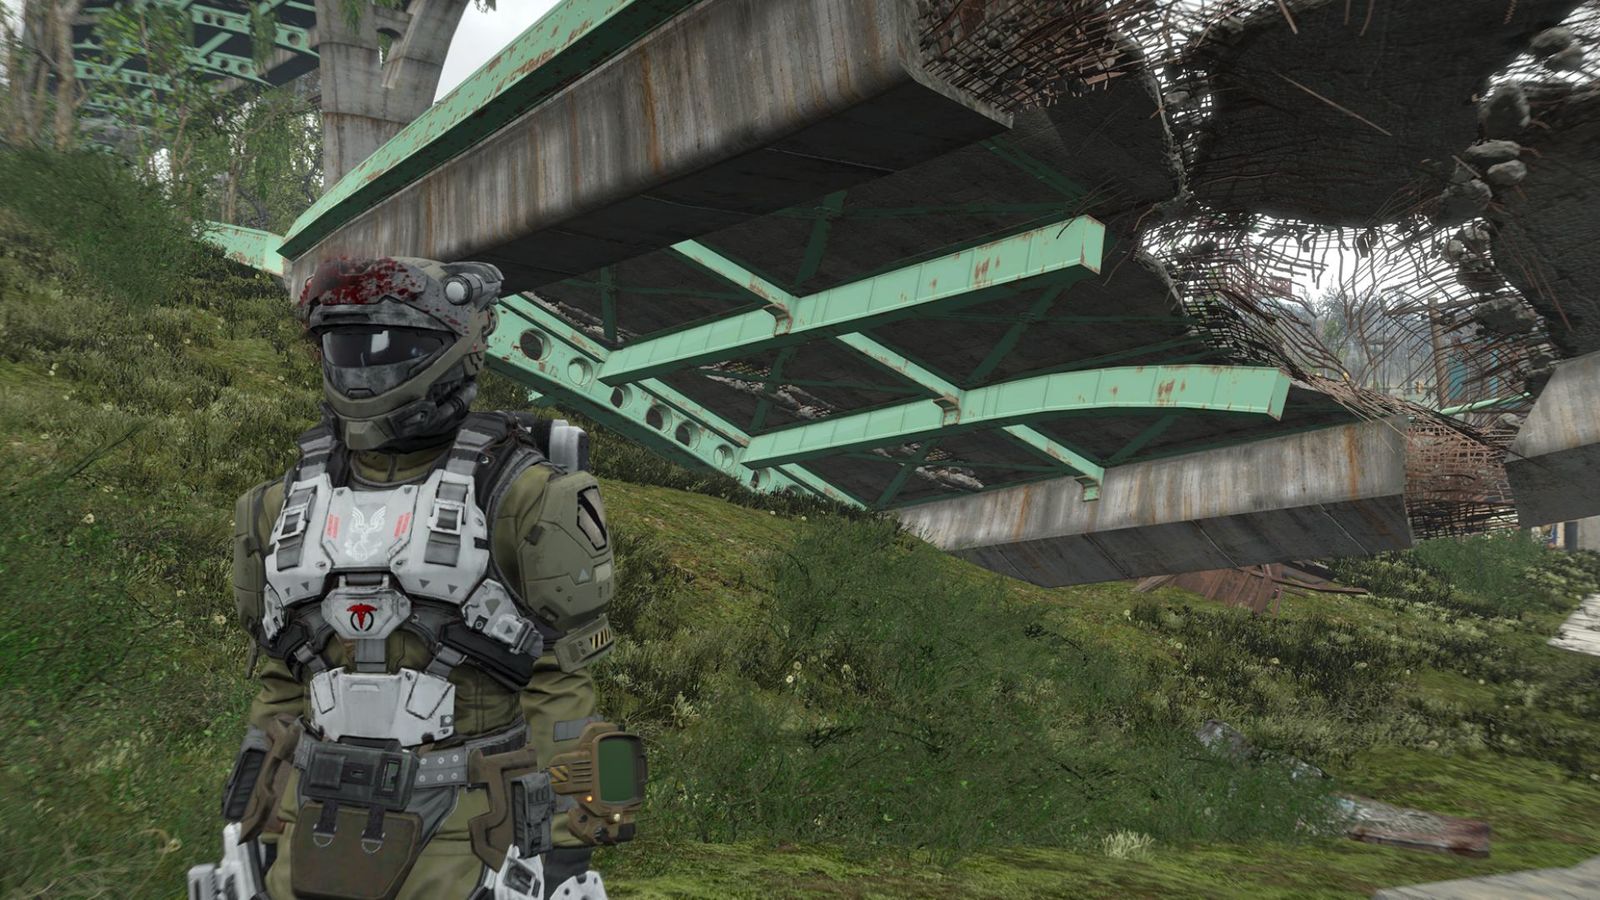 An ODST walking through Fallout 4's wasteland